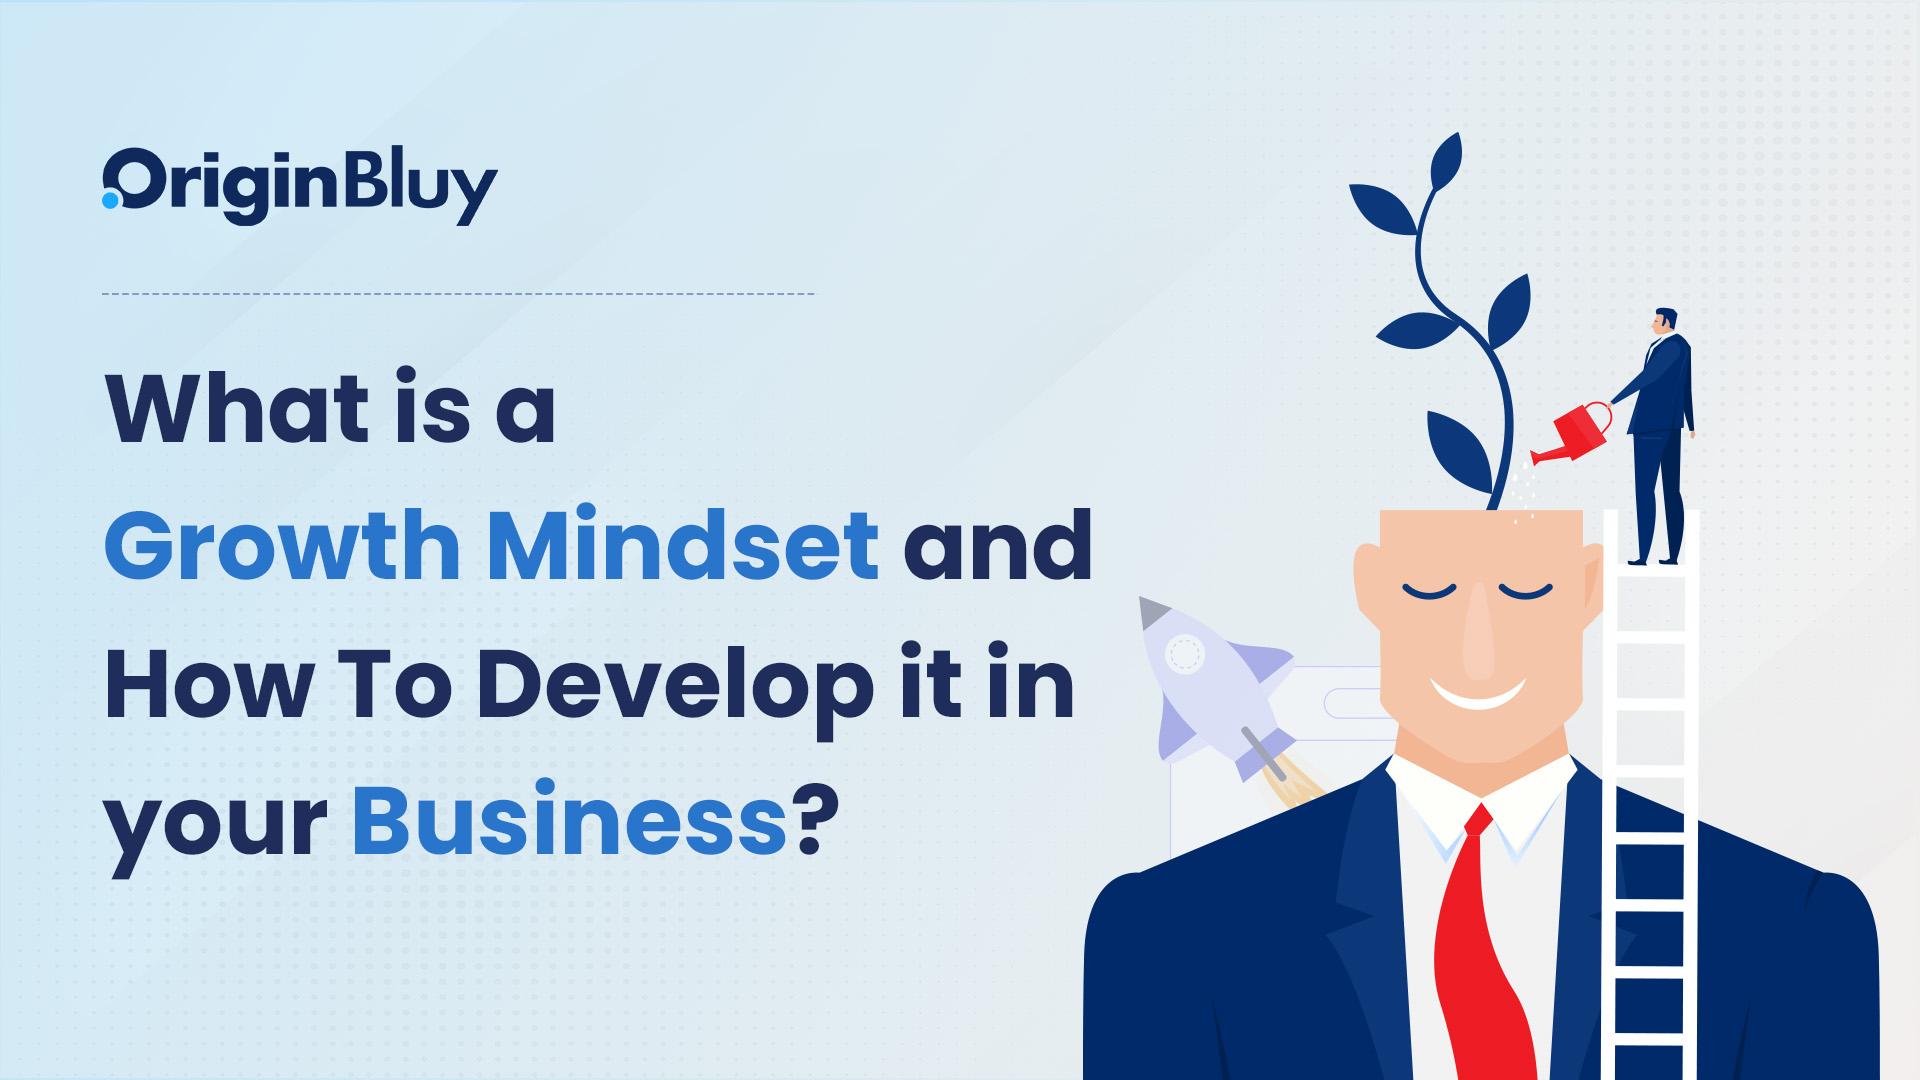 What is a Growth Mindset and How to Develop it in Your Business?